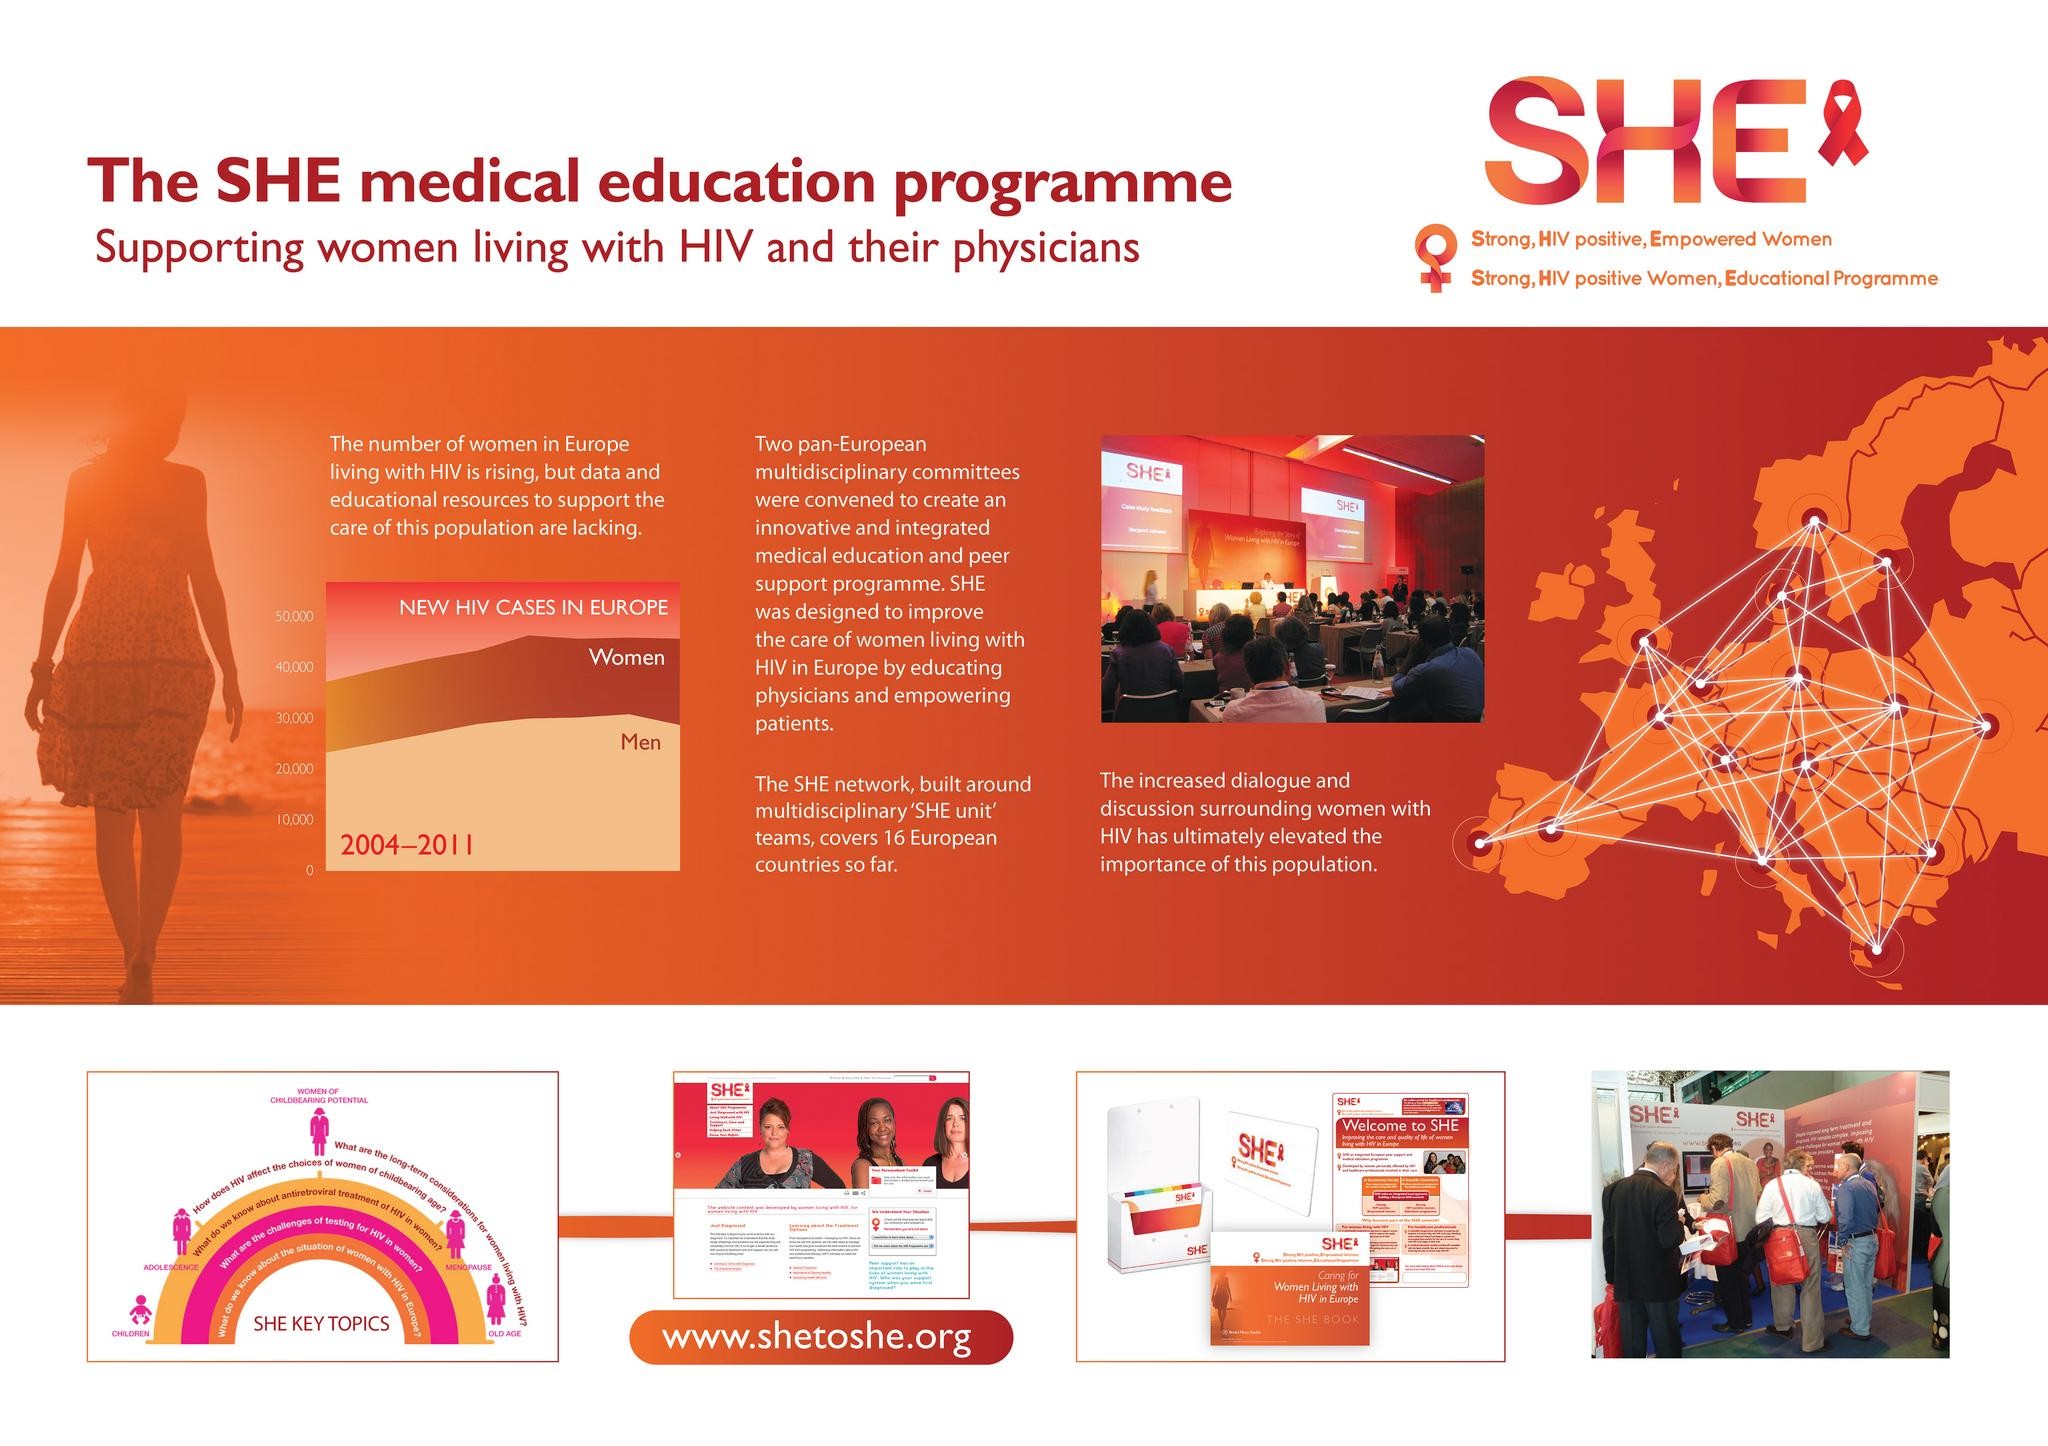 THE SHE MEDICAL EDUCATION PROGRAMME